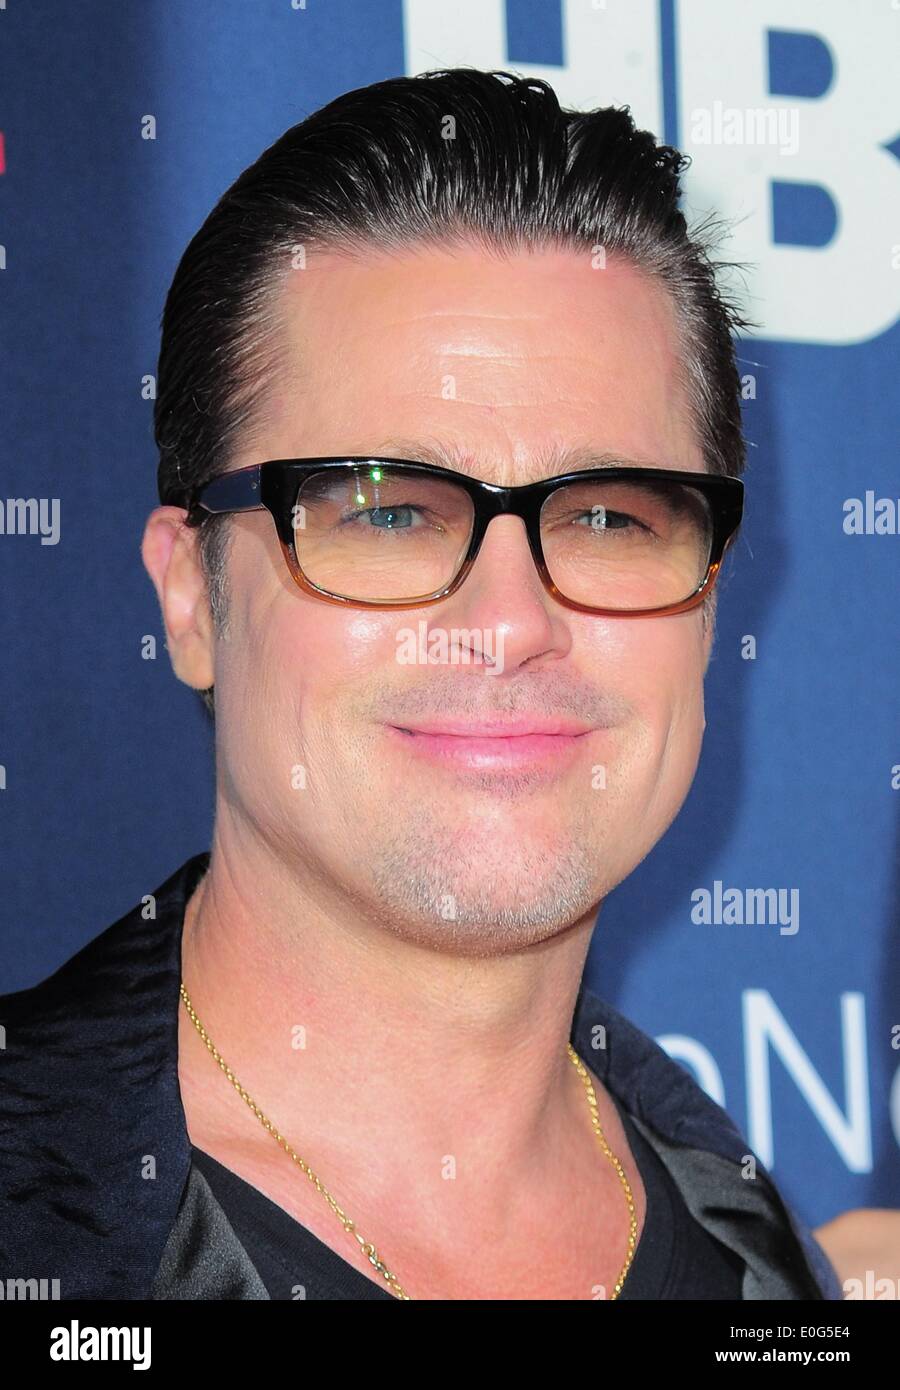 New York, NY, USA. 12th May, 2014. Brad Pitt at arrivals for THE NORMAL  HEART Premiere on HBO, Ziegfeld Theatre, New York, NY May 12, 2014. Credit:  Gregorio T. Binuya/Everett Collection/Alamy Live